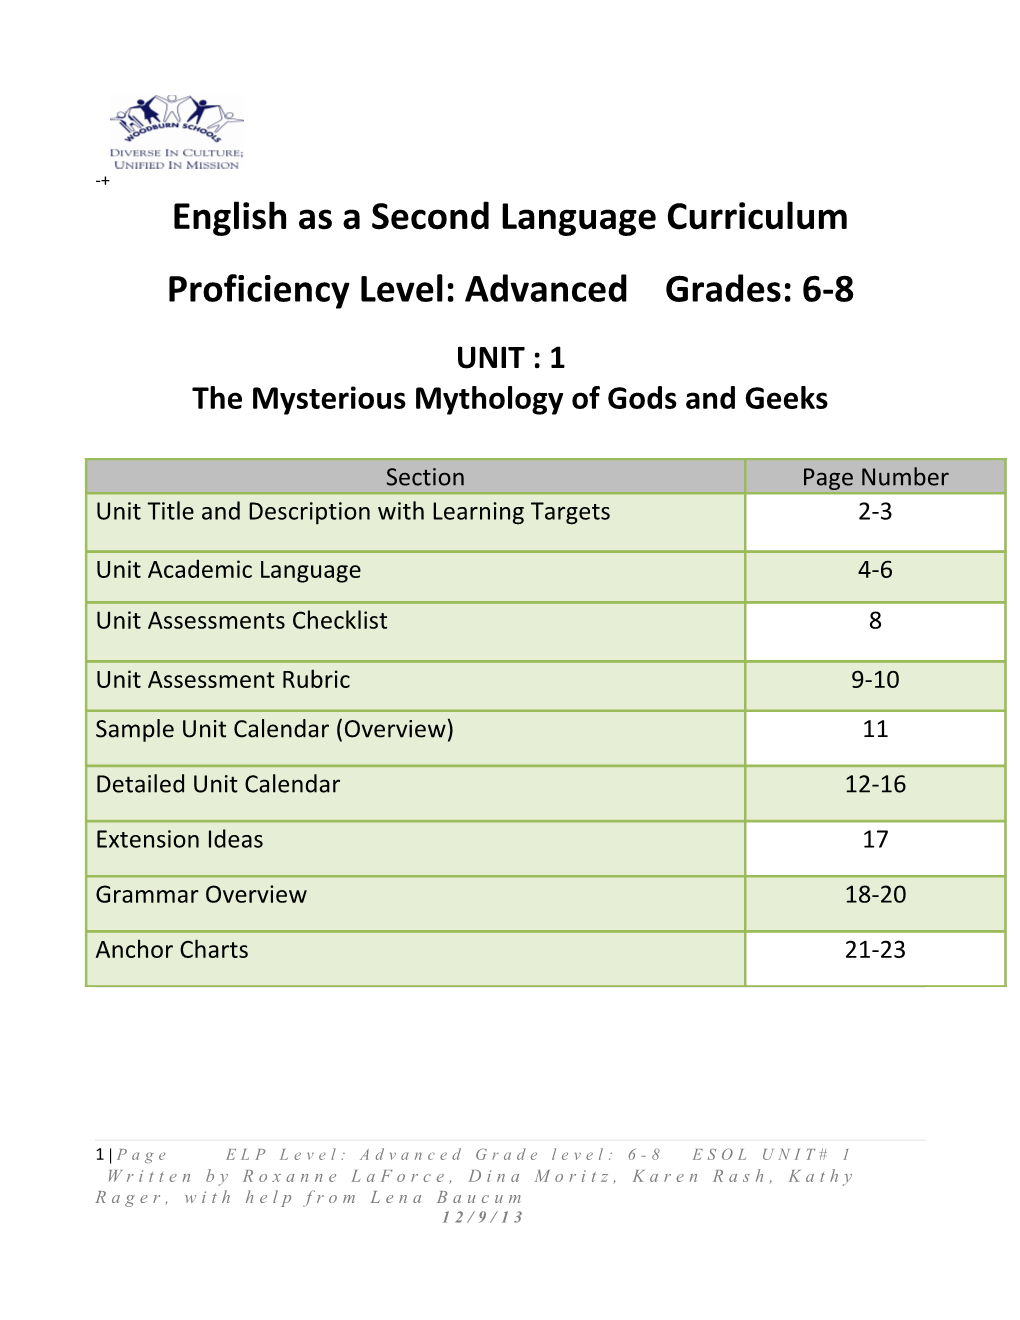 English As a Second Language Curriculum